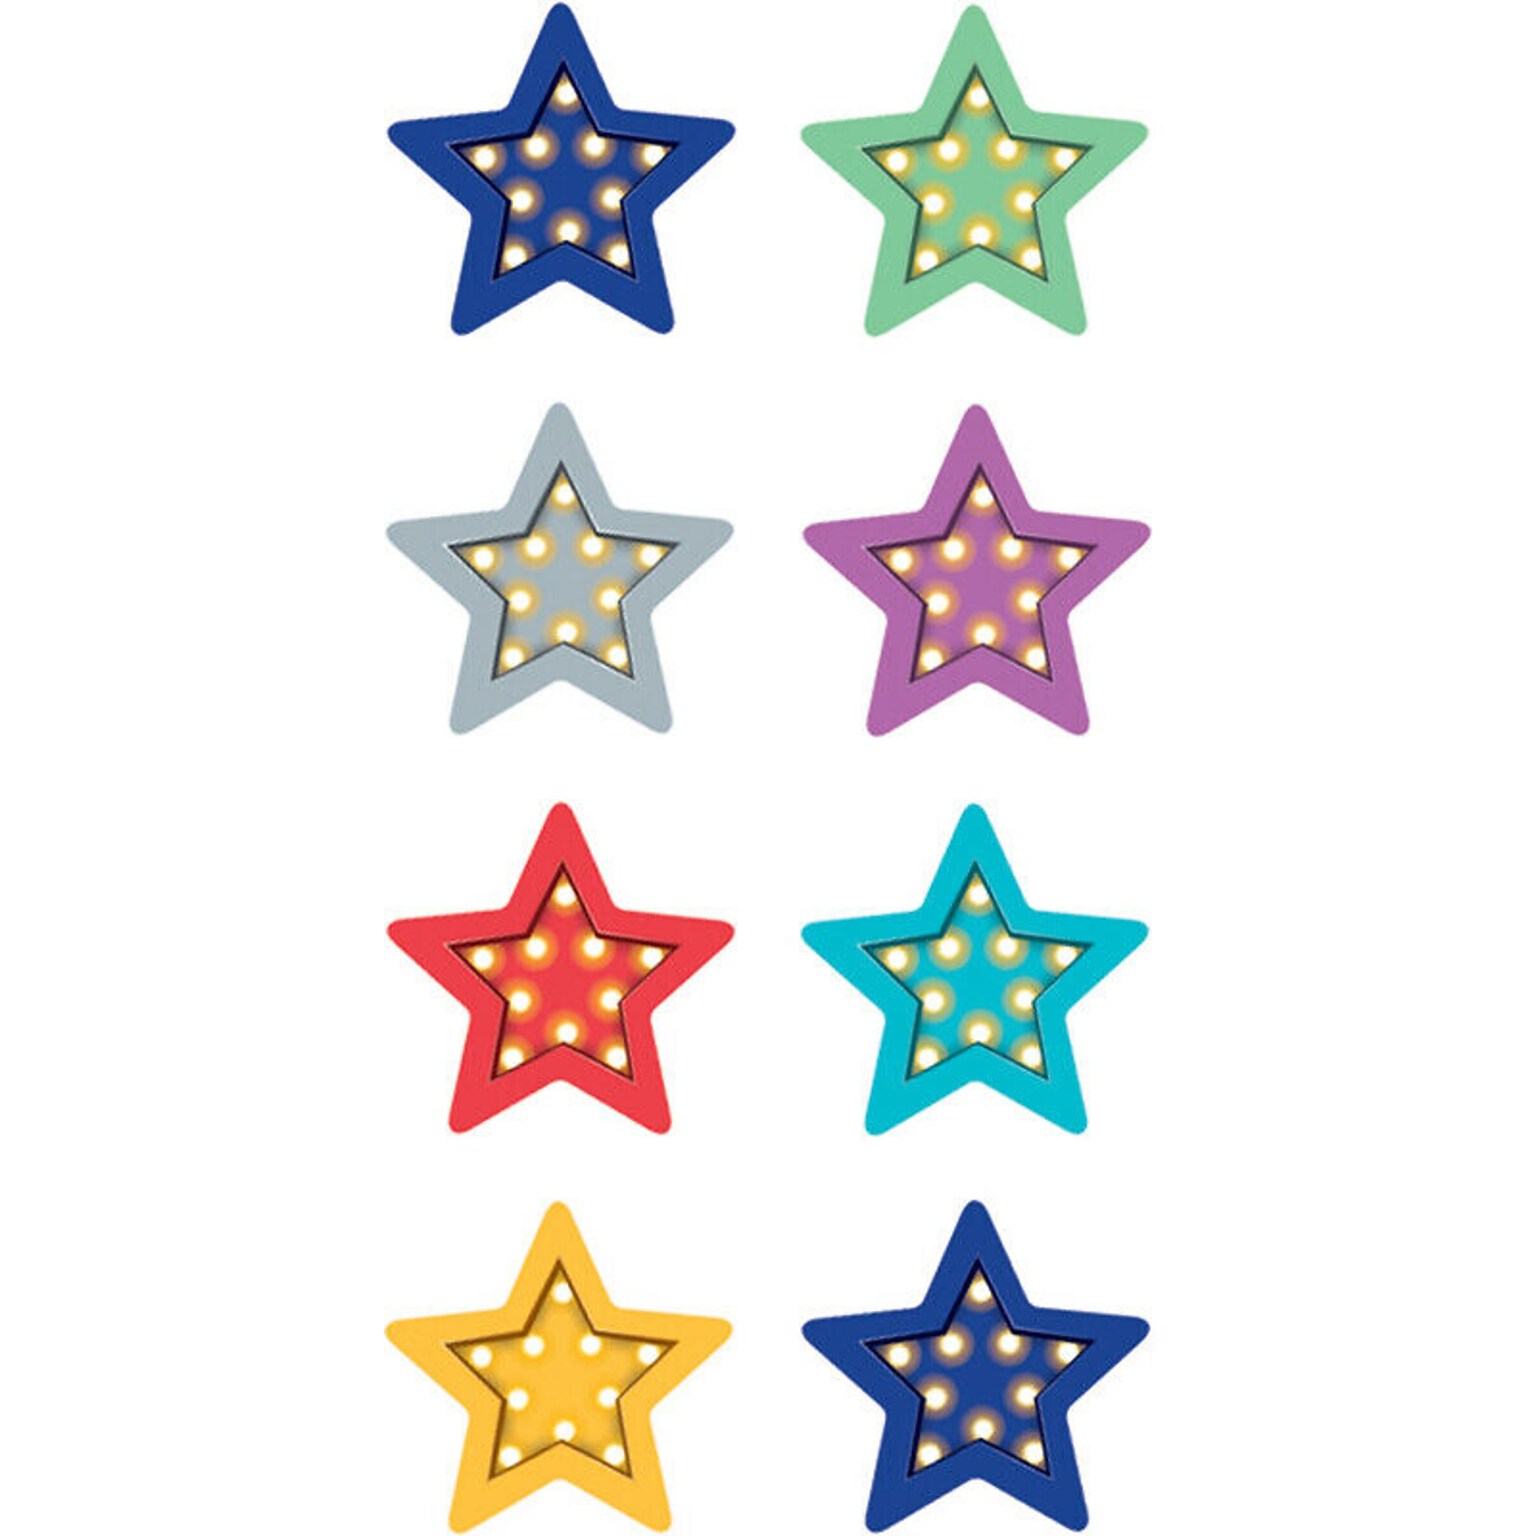 Trend Enterprises® Marquee Stars Mini Stickers, 800ct per pack, bundle of 6 packs (TCR5441)